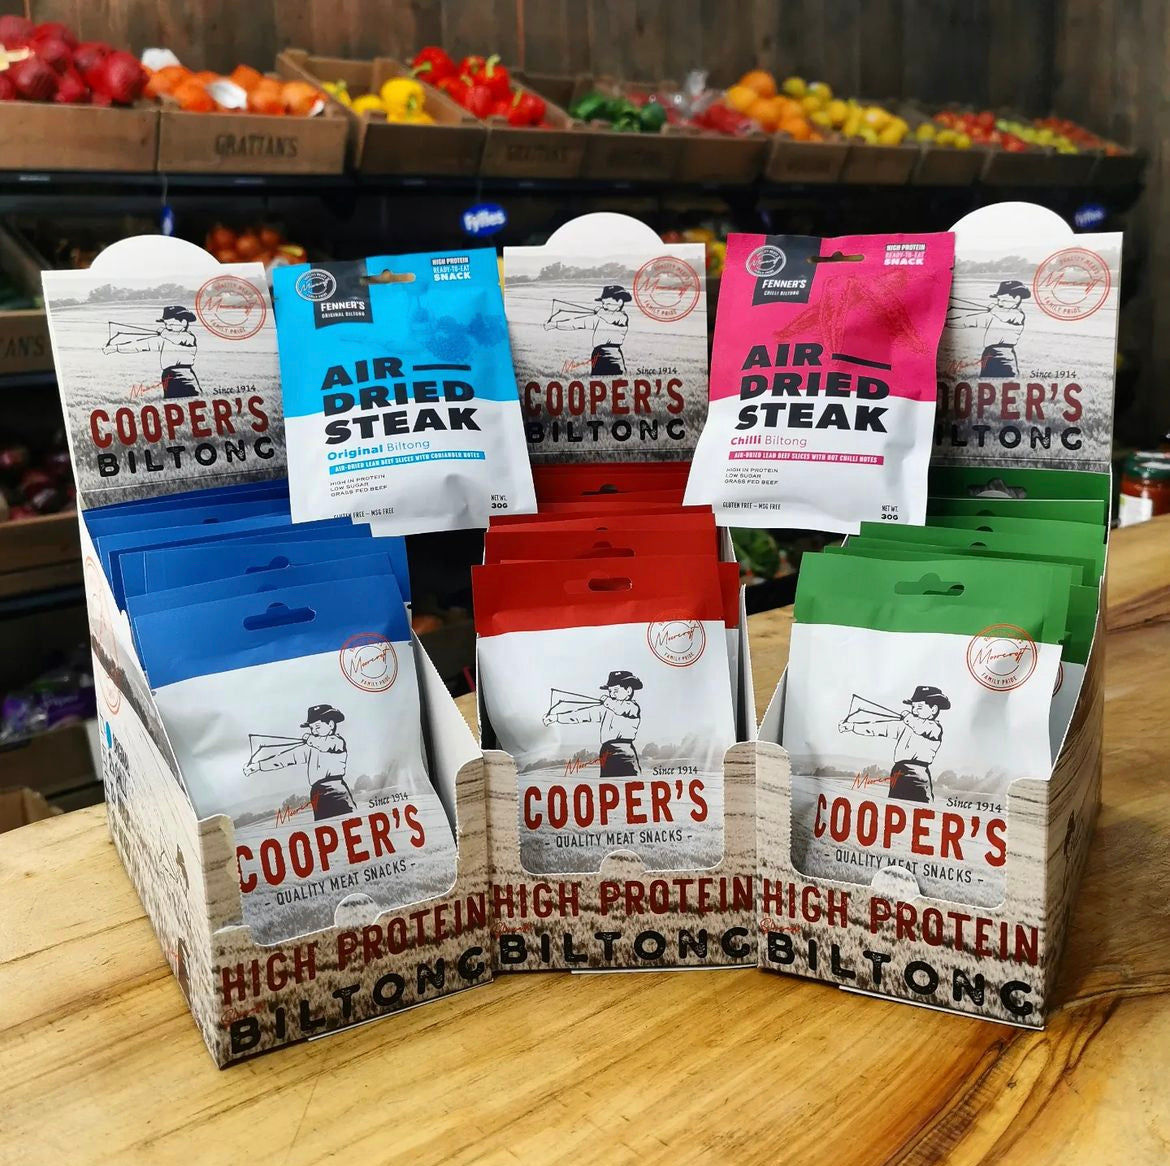 A display of Cooper's High Protein Biltong packets arranged in a wooden stand at a market, with Fenner's Air Dried Steak packets interspersed. The packets are colour-coded—blue for Original and pink for Chilli—prominently placed against a backdrop of fresh produce. The stand invites passersby to try these quality meat snacks, showcasing a variety of flavours.